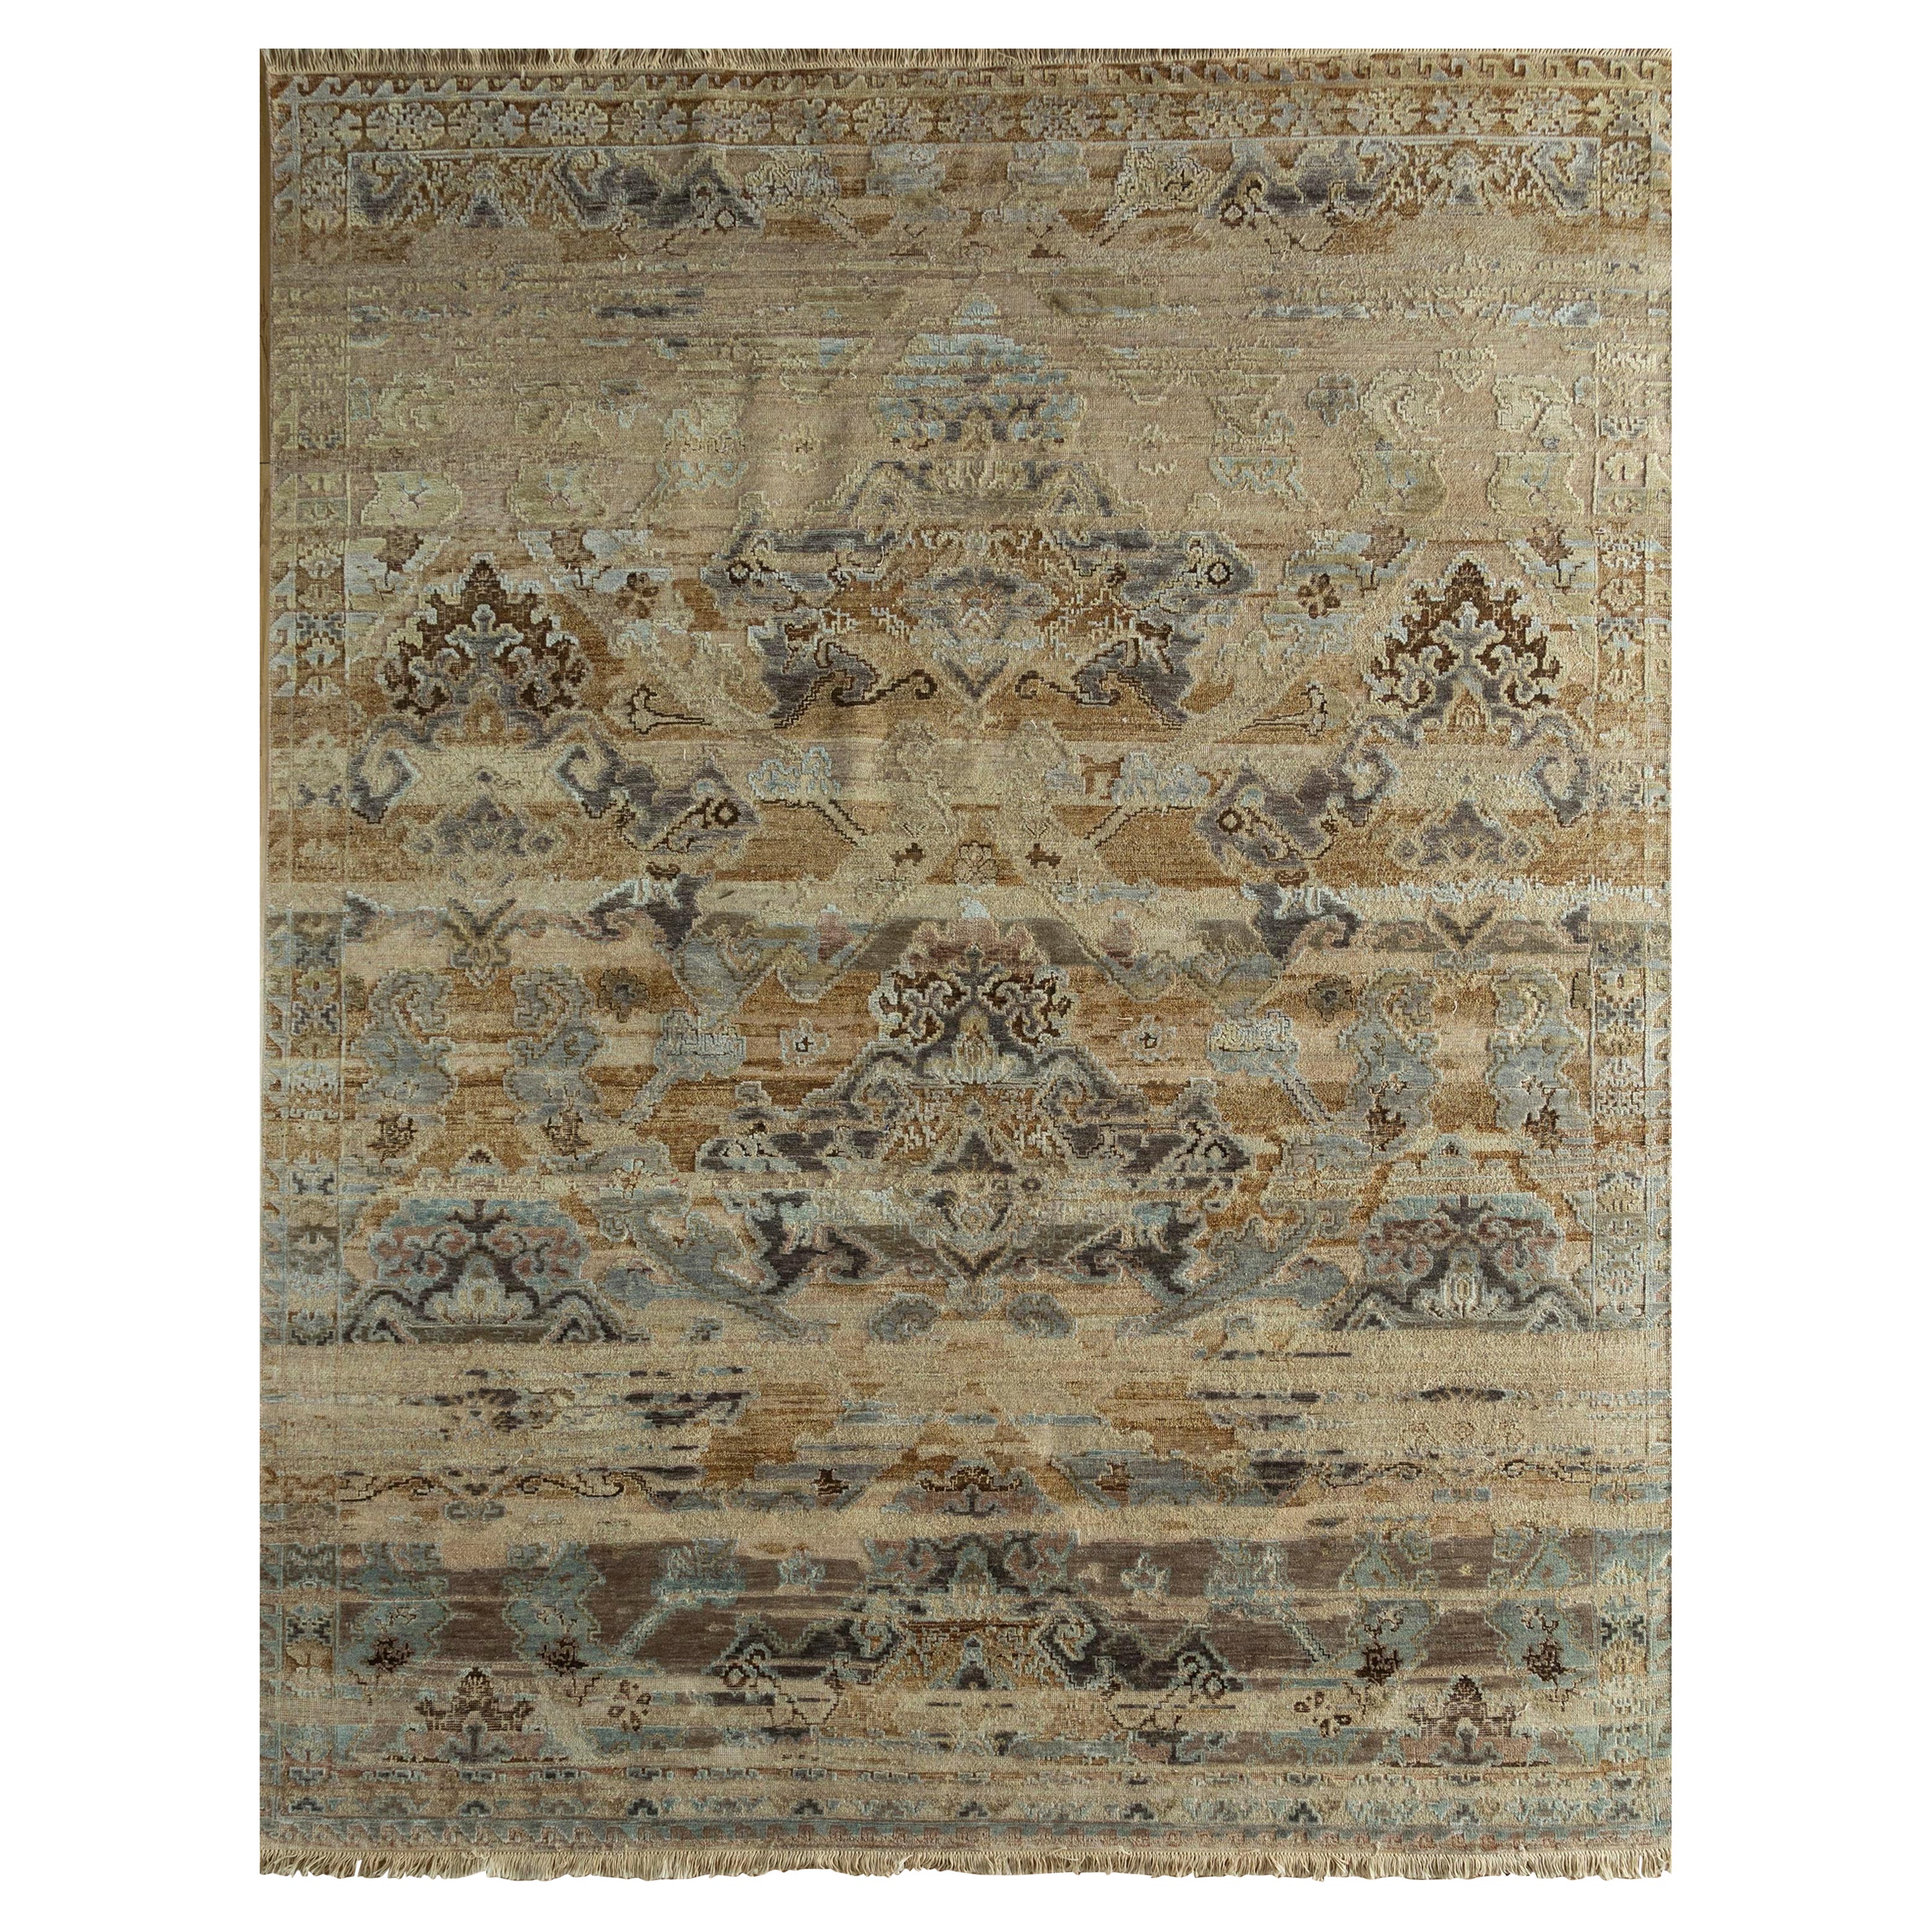 Loomed Legends Soft Beige & Pink Tint 240X300 cm Handknotted Rug